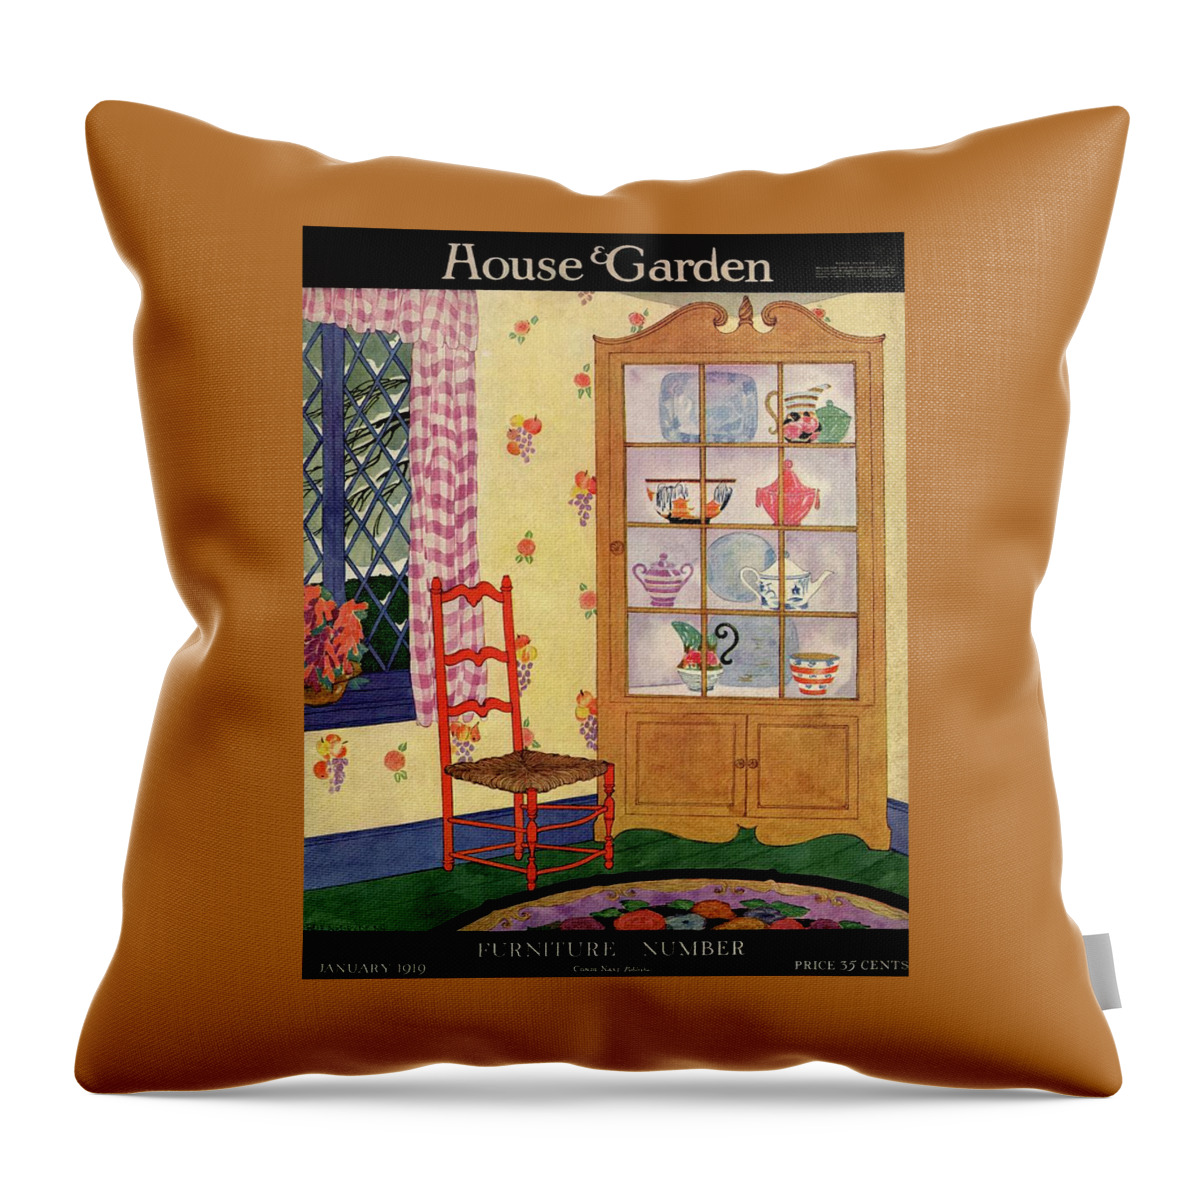 A House And Garden Cover Of A Chair By A Cabinet Throw Pillow